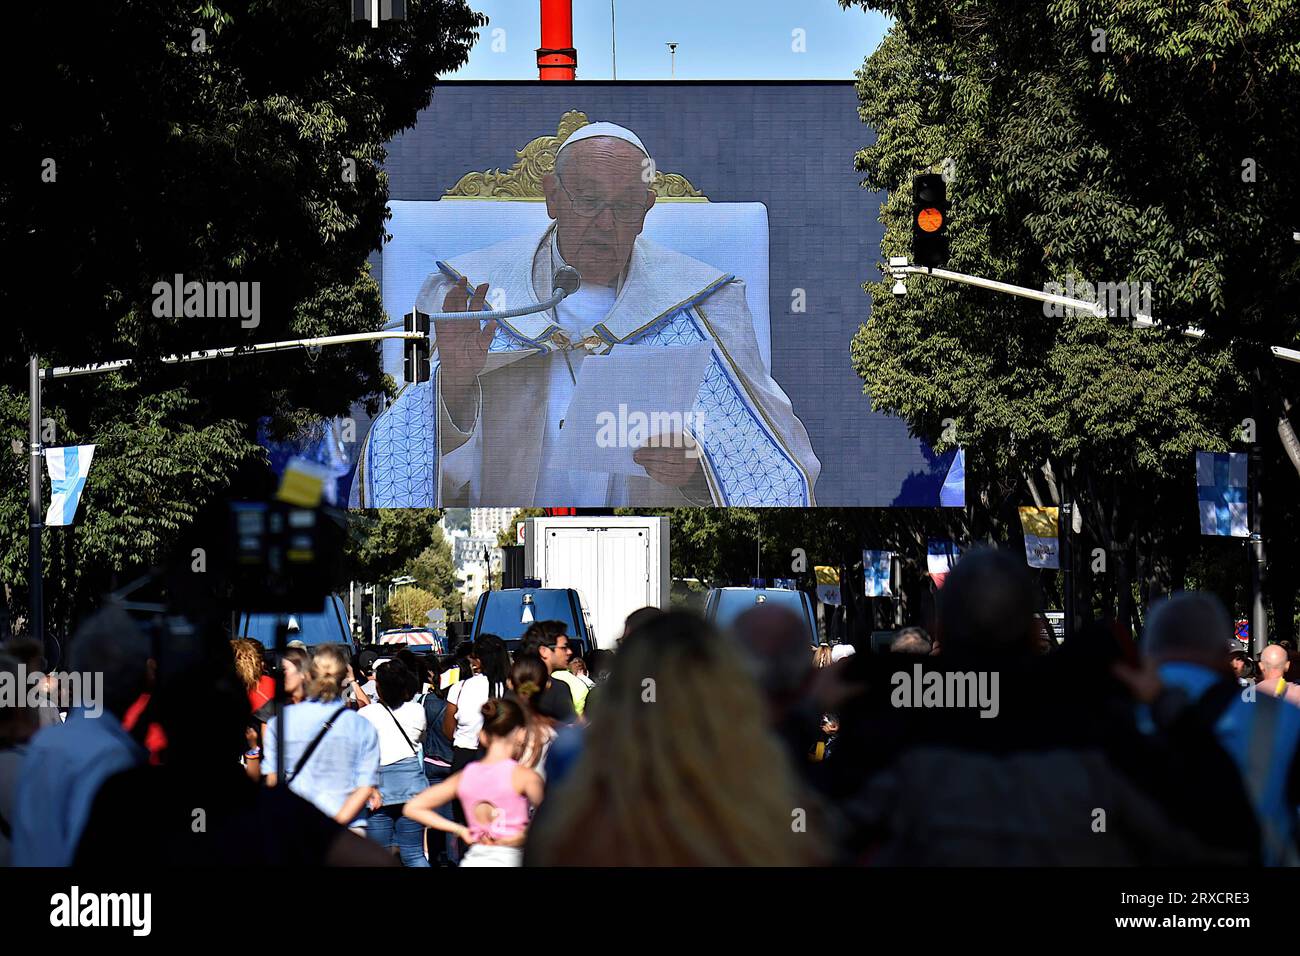 People attend the mass given by Pope Francis at the Vélodrome on a super giant screen. Thousands of people came to see Pope Francis stroll in his “Papamobile” on Avenue du Prado, they attended the high mass on giant screens at the Vélodrome stadium. Stock Photo